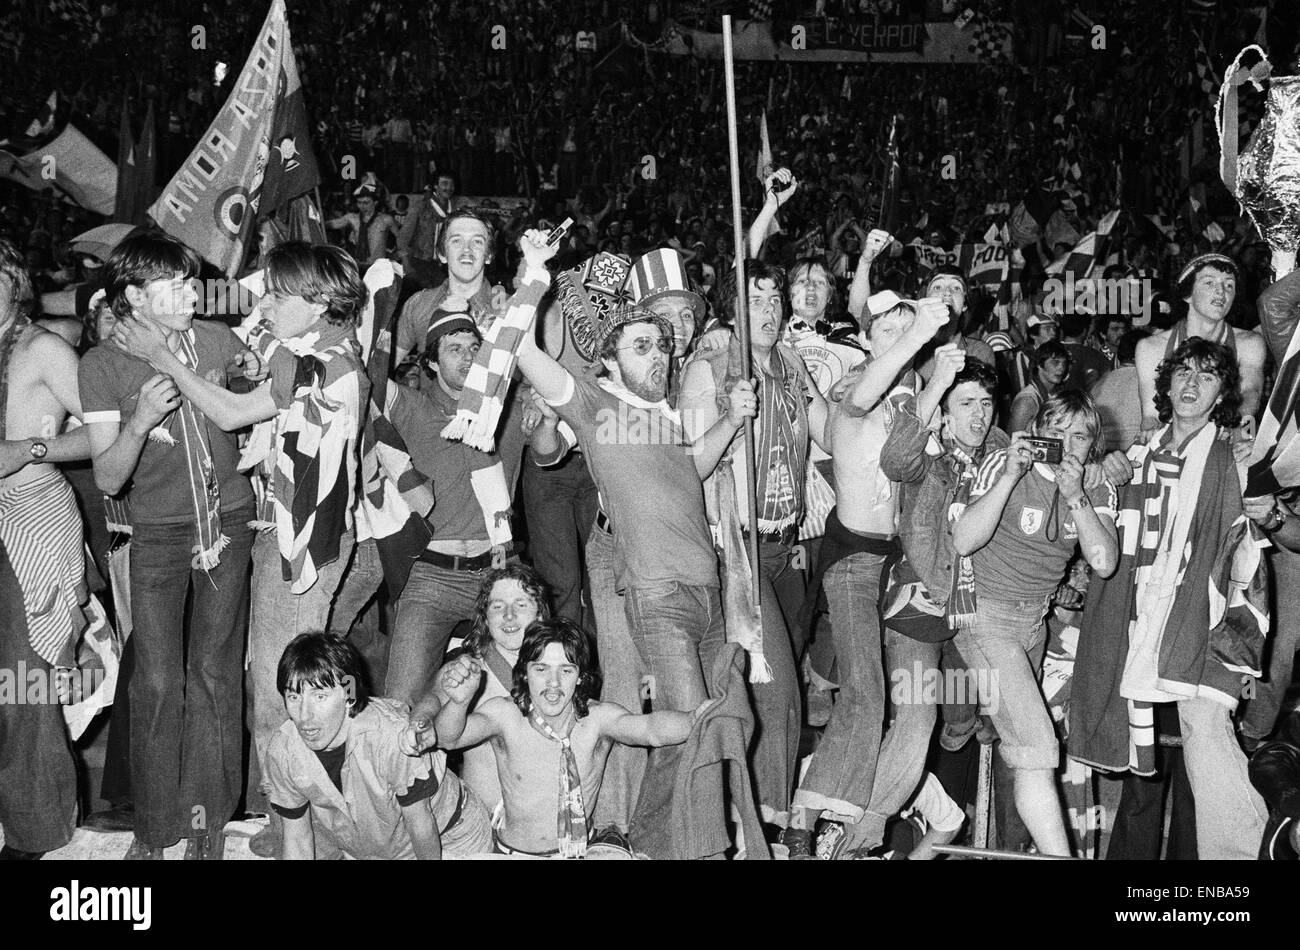 European Cup Final at the Stadio Olimpico in Rome, Italy. Liverpool 3 v Borussia Monchengladbach 1. Liverpool fans celebrate their first ever European Cup victory. 25th May 1977. Stock Photo